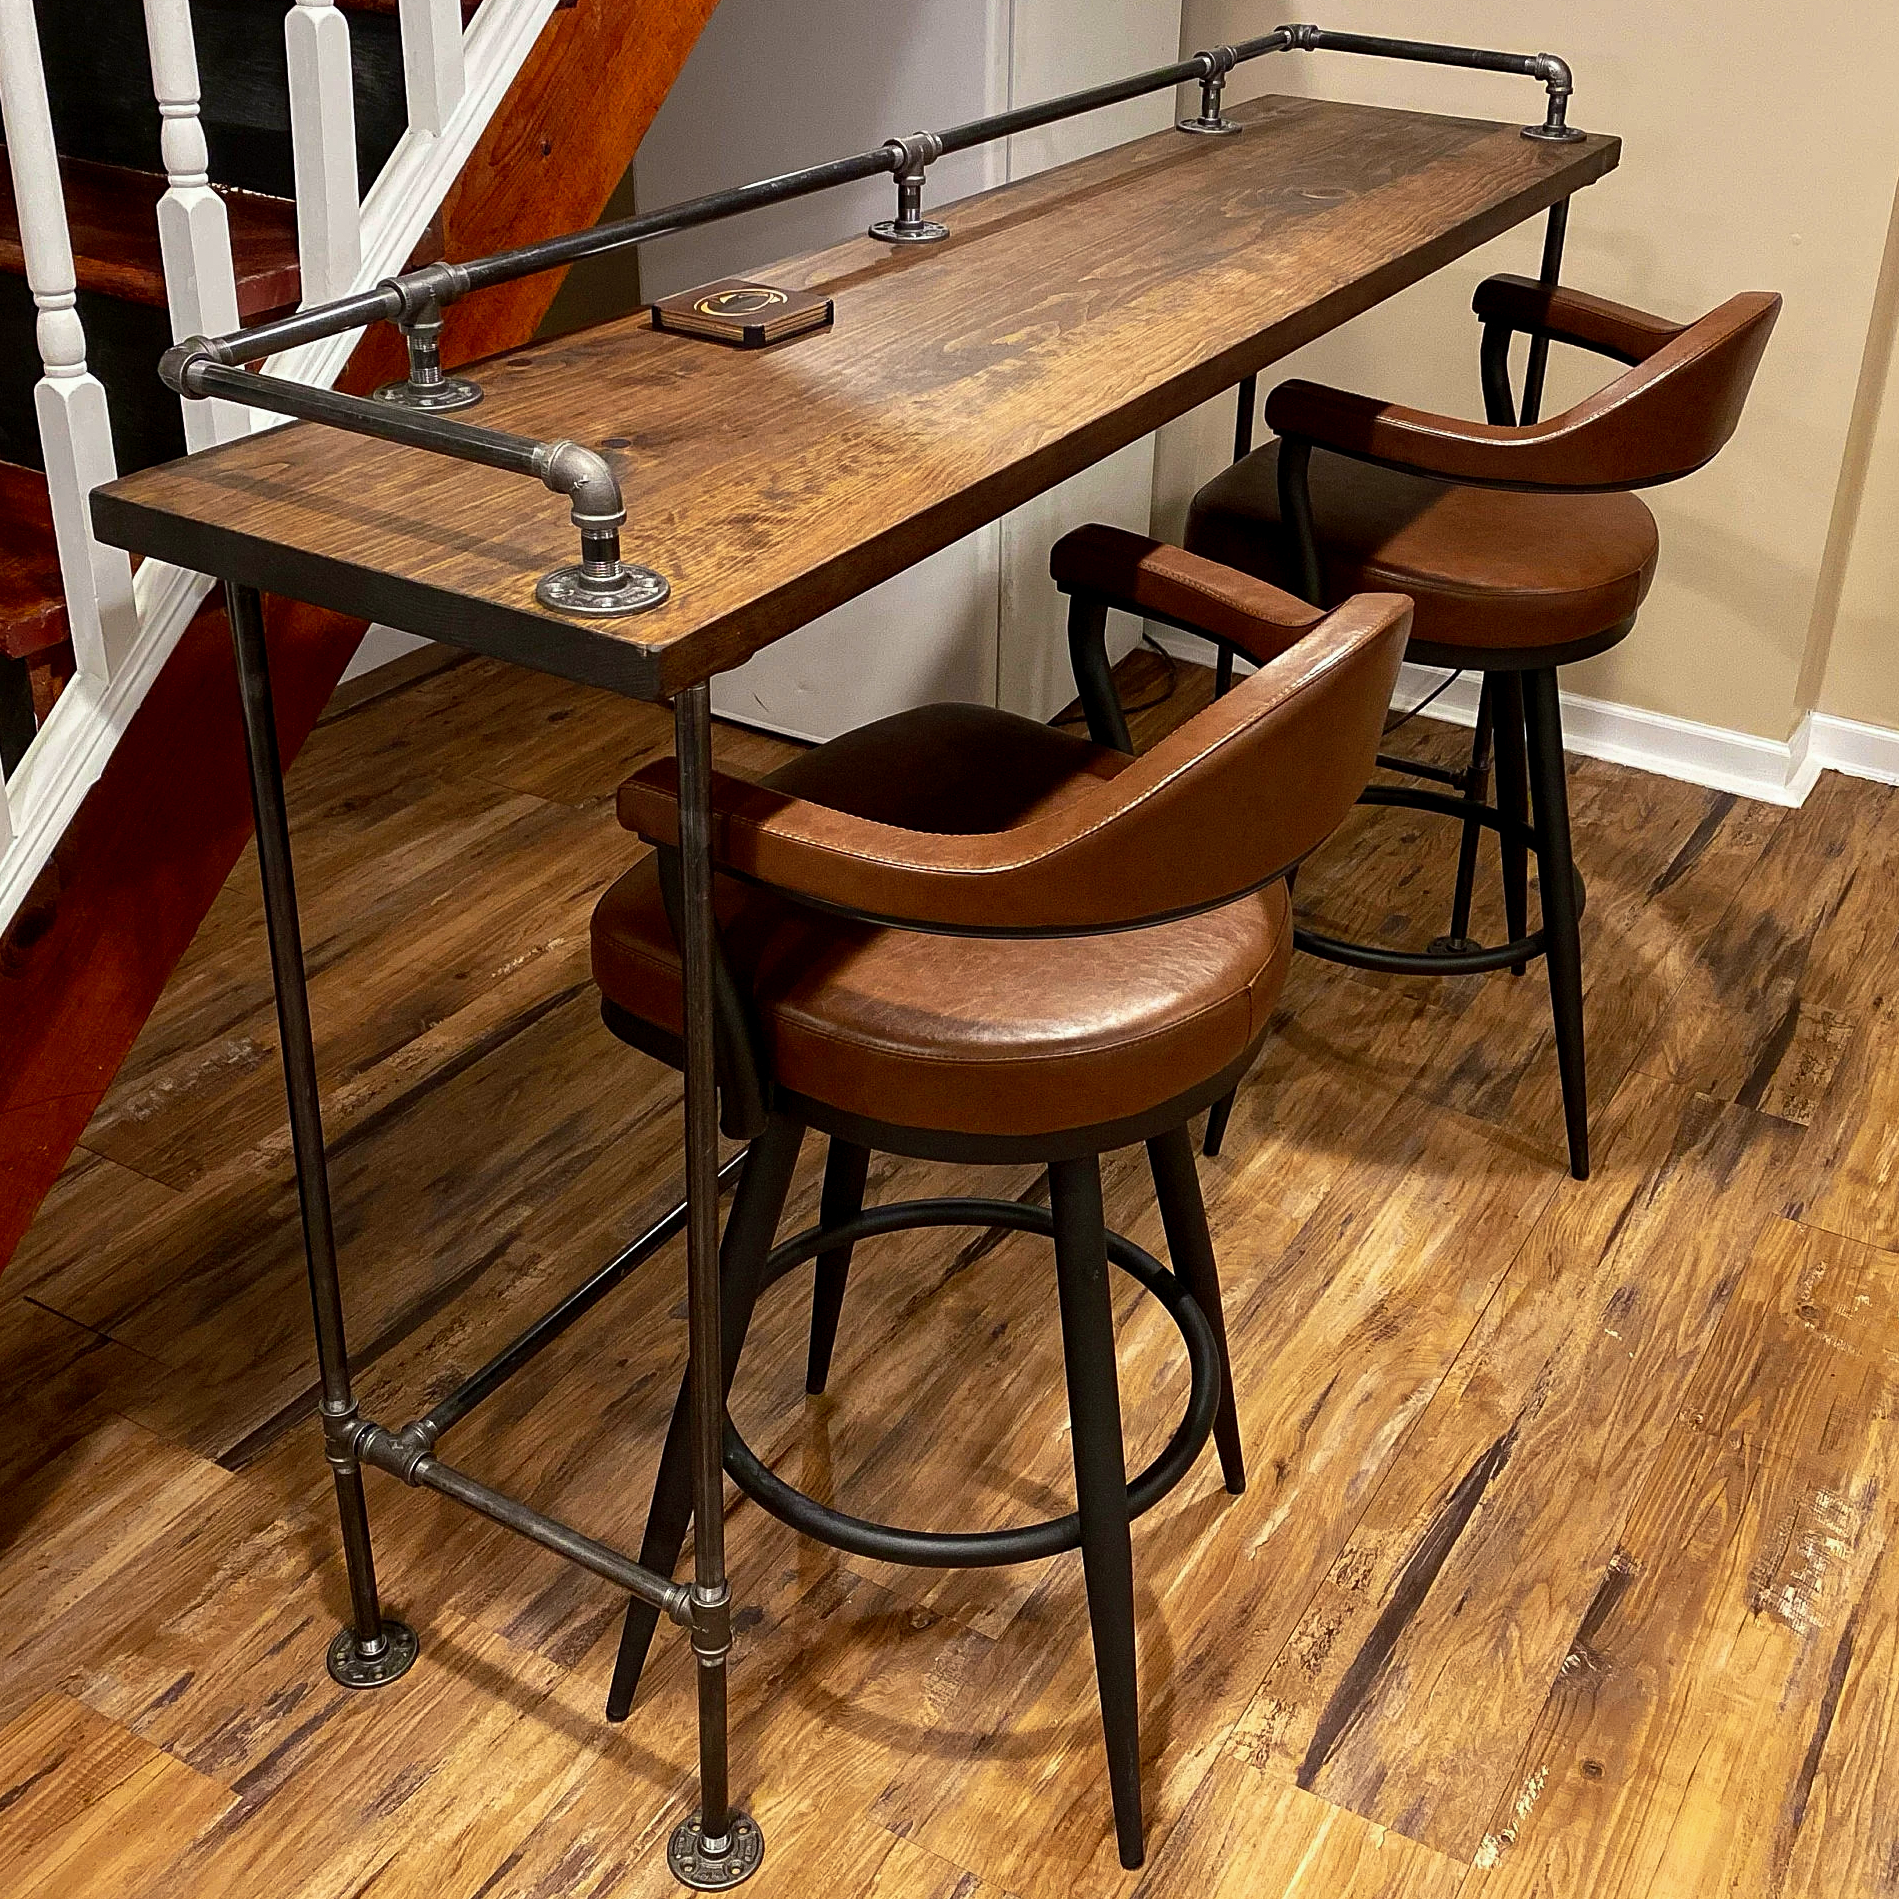 Tall Breakfast Bar Table with Drink Rail